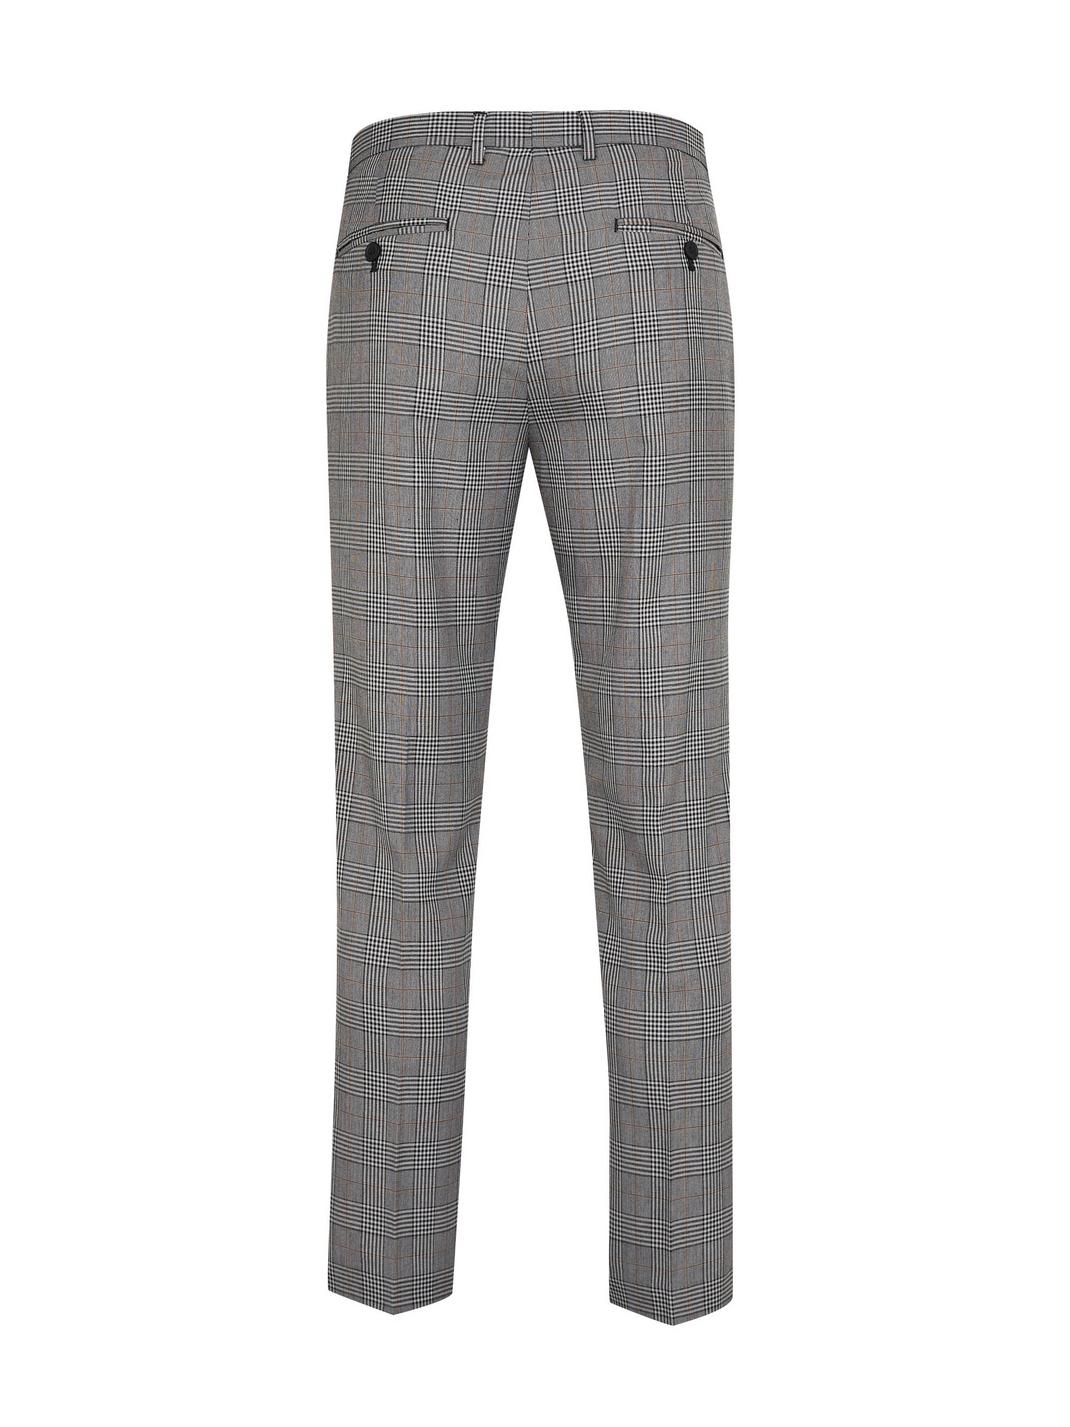 131 Charcoal Skinny Check Trousers image number 2